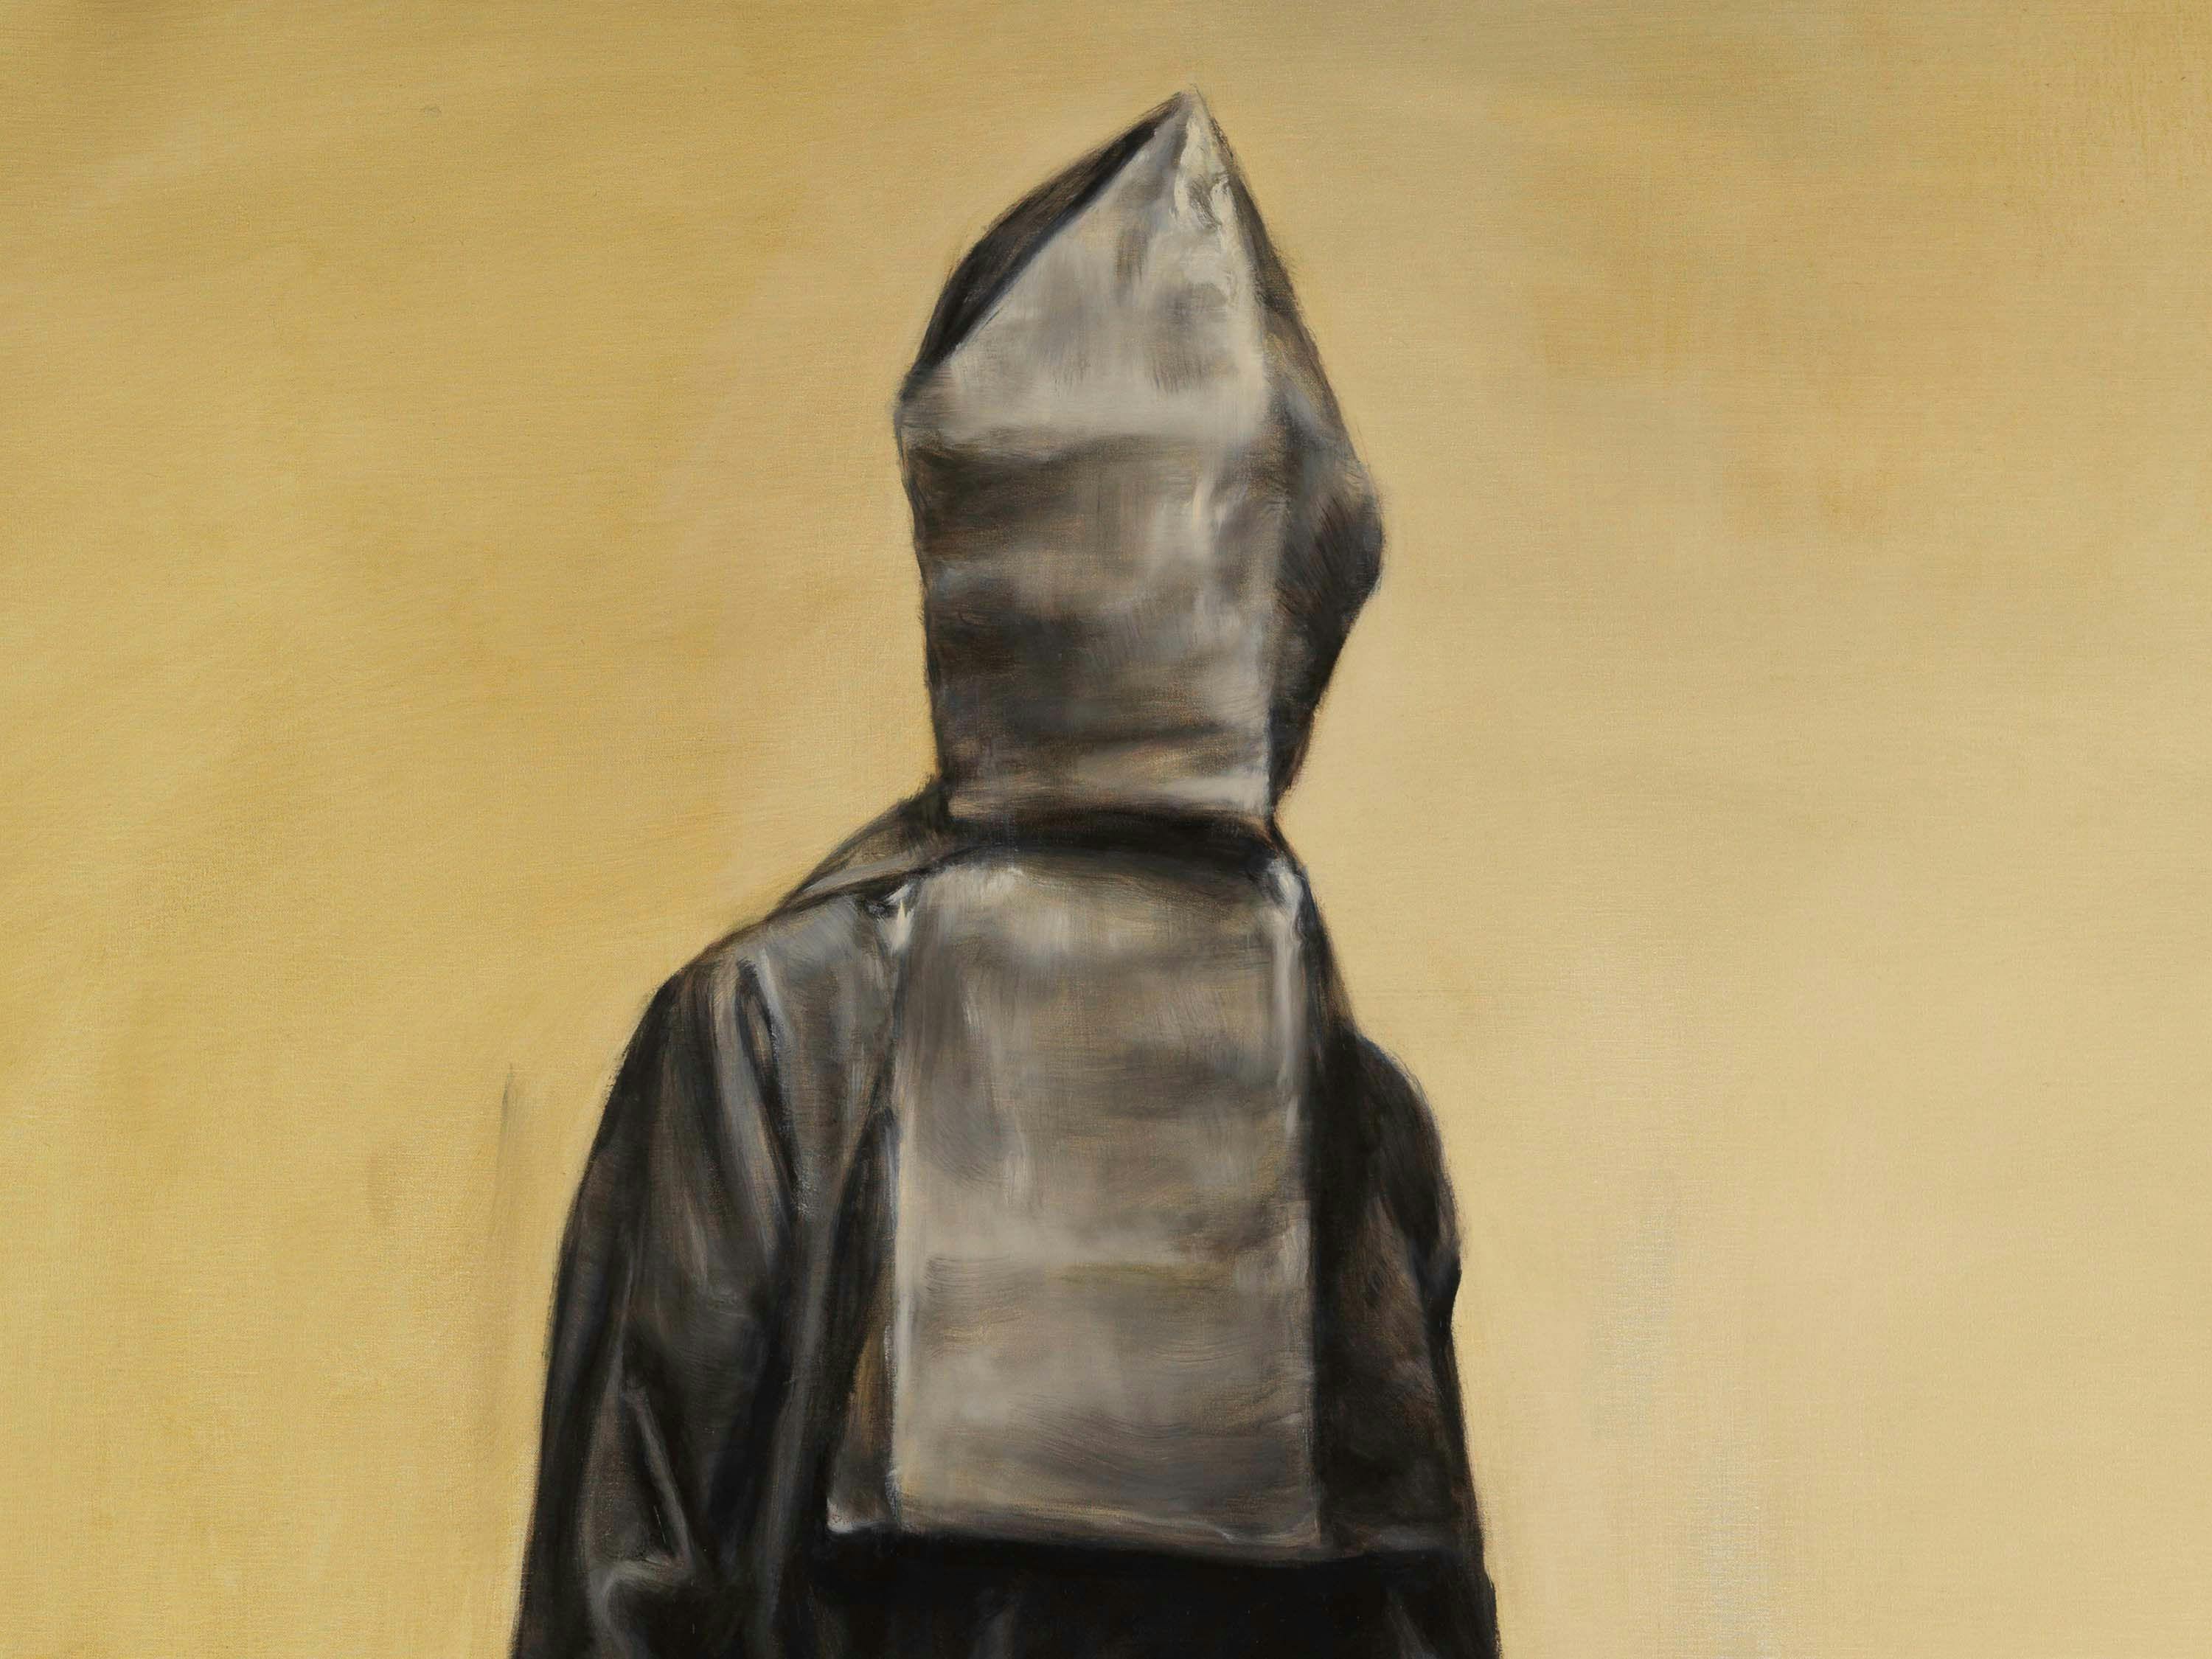 A detail from a painting by Michael Borremans, titled Black Mould II, dated 2014